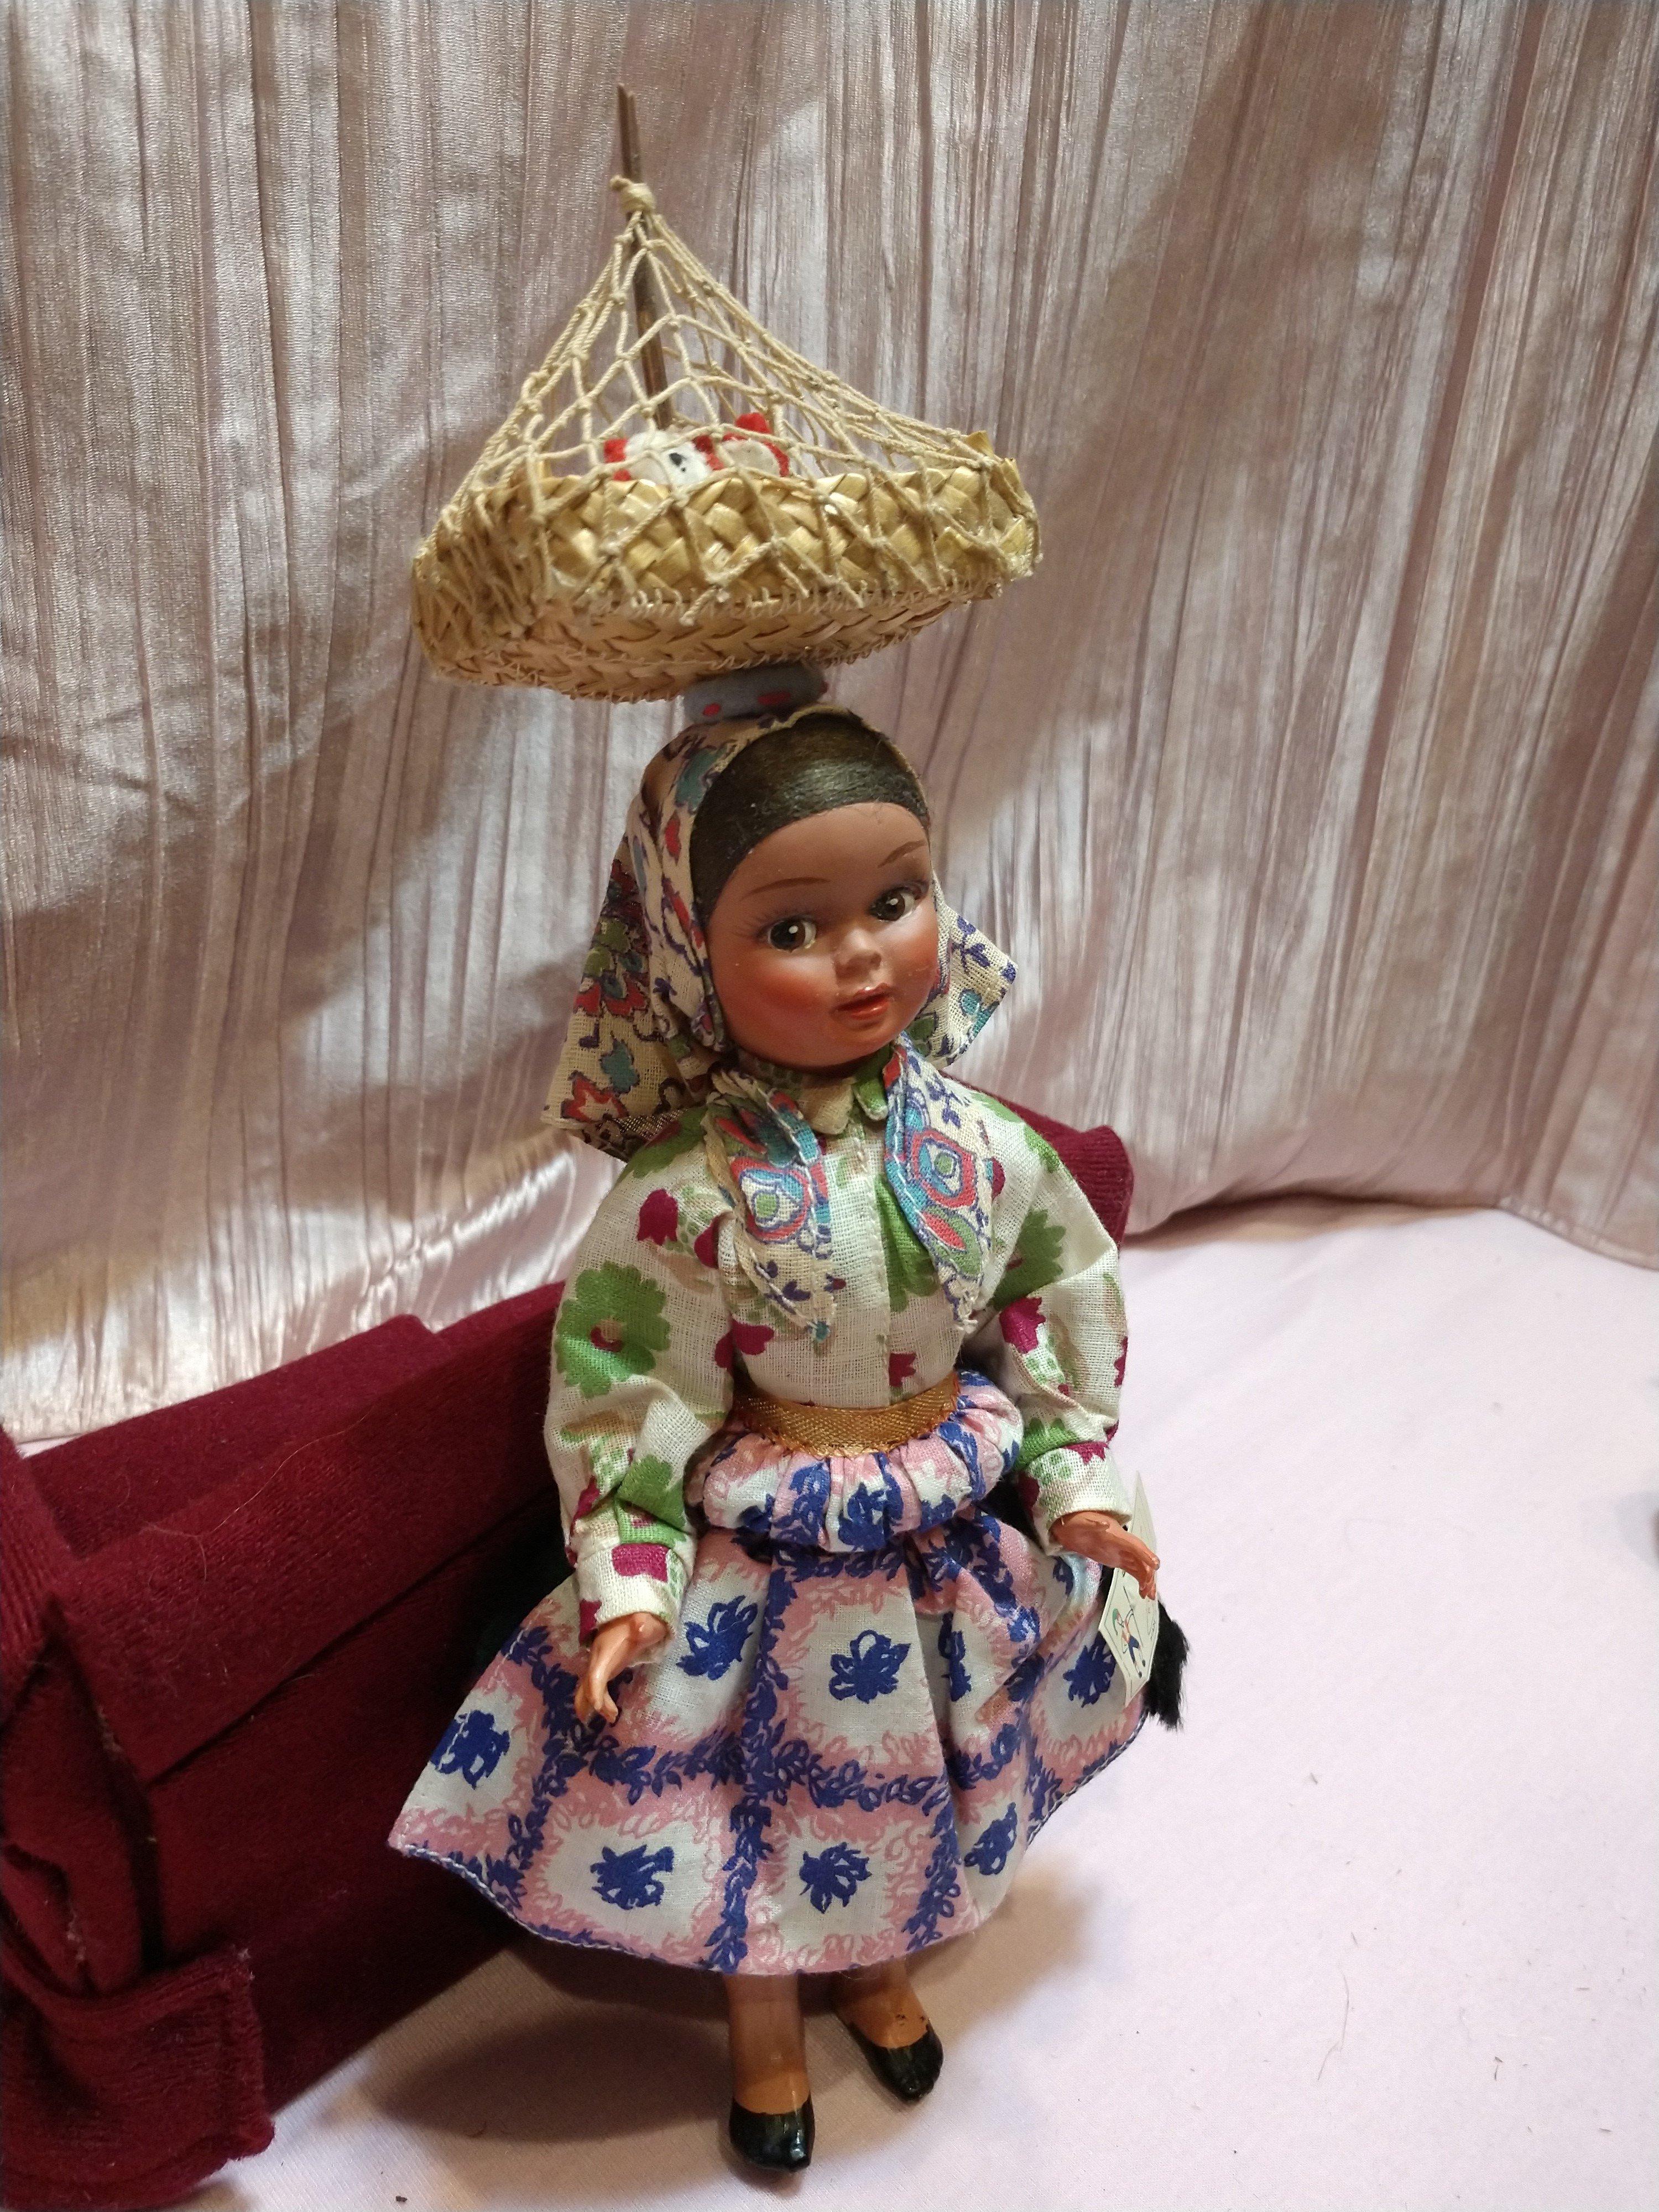 Vintage Rare Tagged Lala Made In Portugal Plastic Doll With Basket Of Chickens Atop Head!